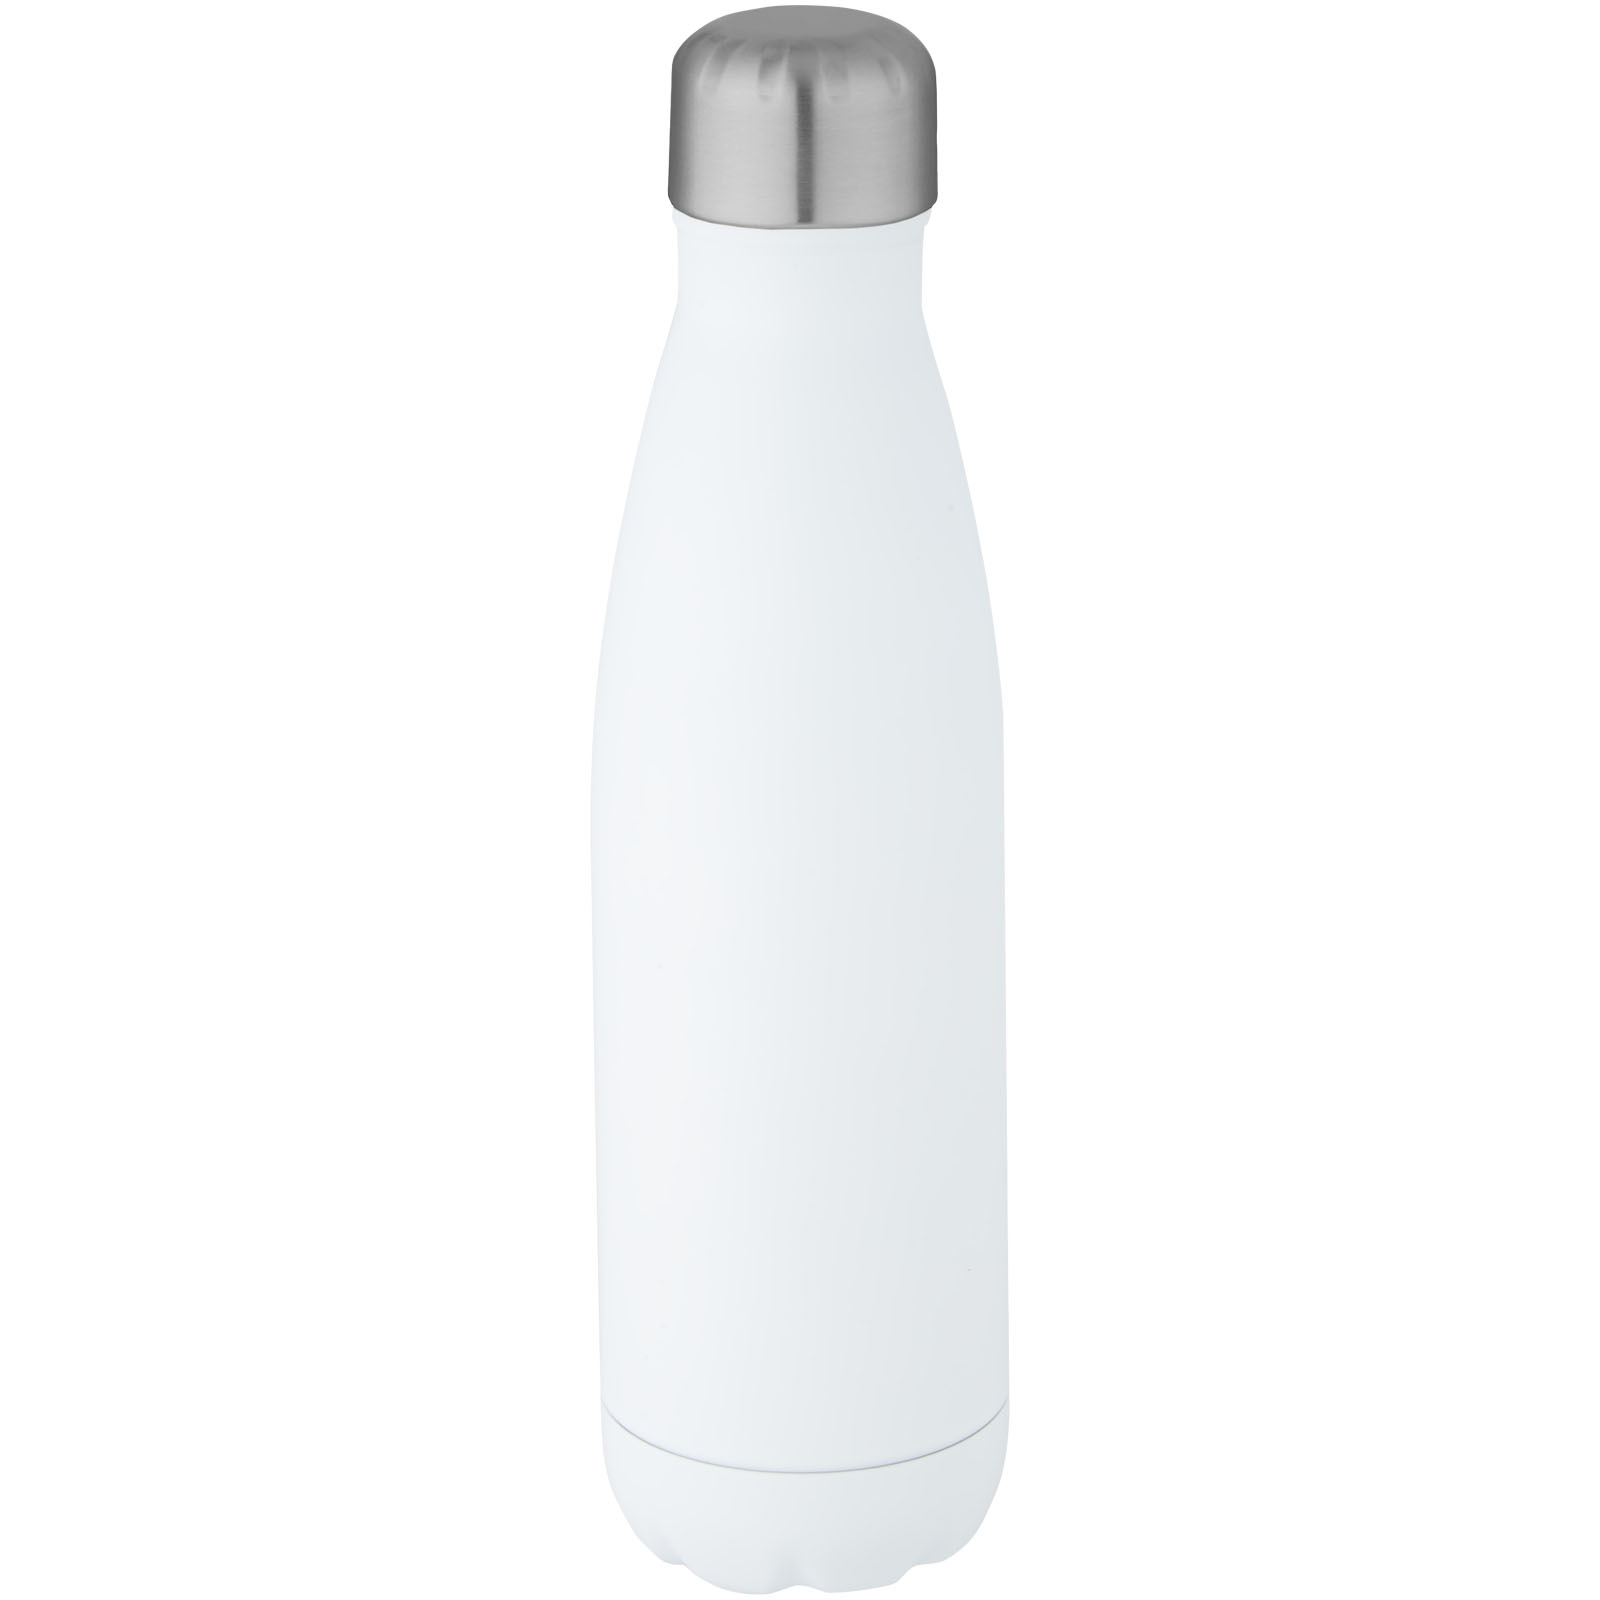 Advertising Insulated bottles - Cove 500 ml vacuum insulated stainless steel bottle